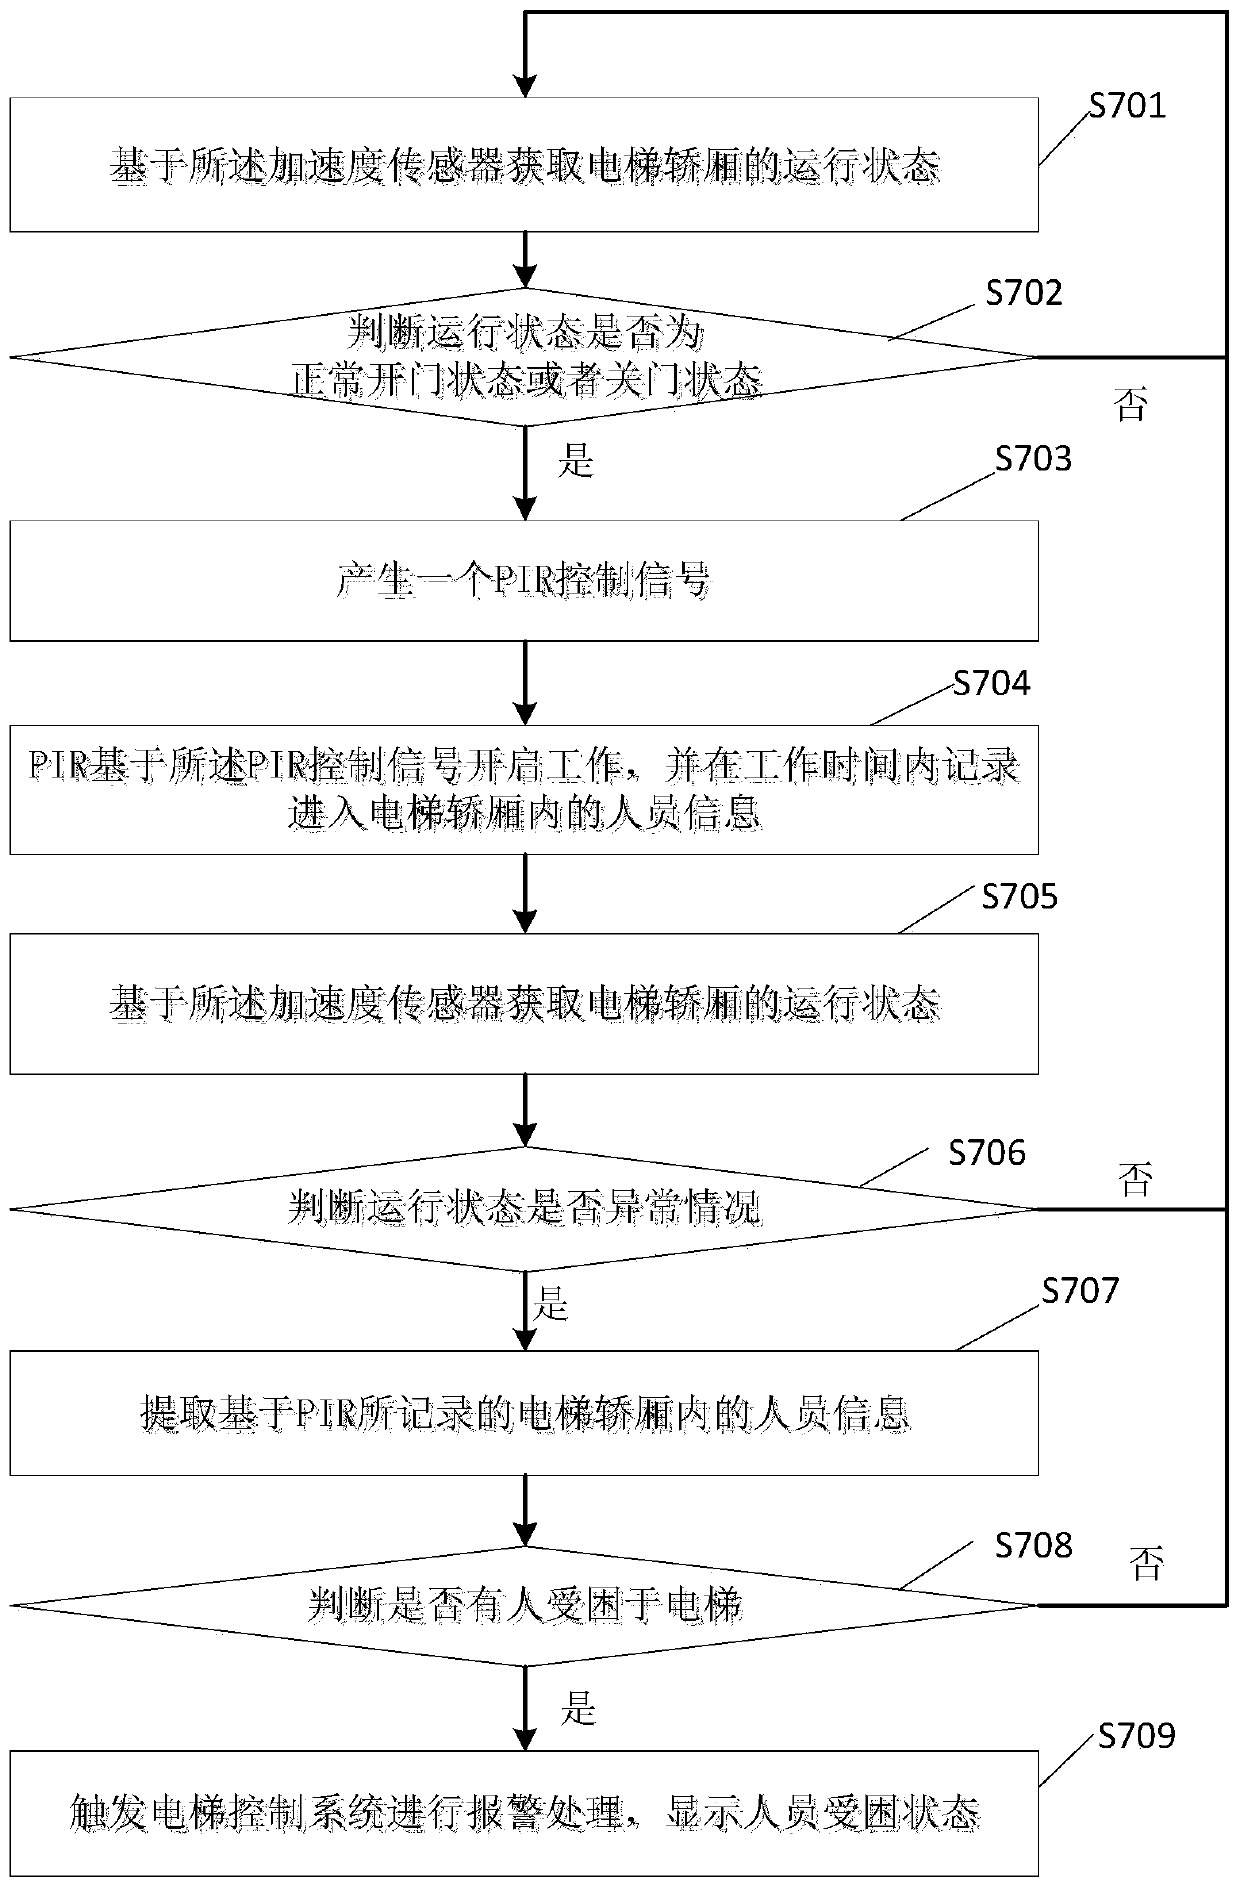 Detection method and system for abnormal trapping of persons in elevator compartment